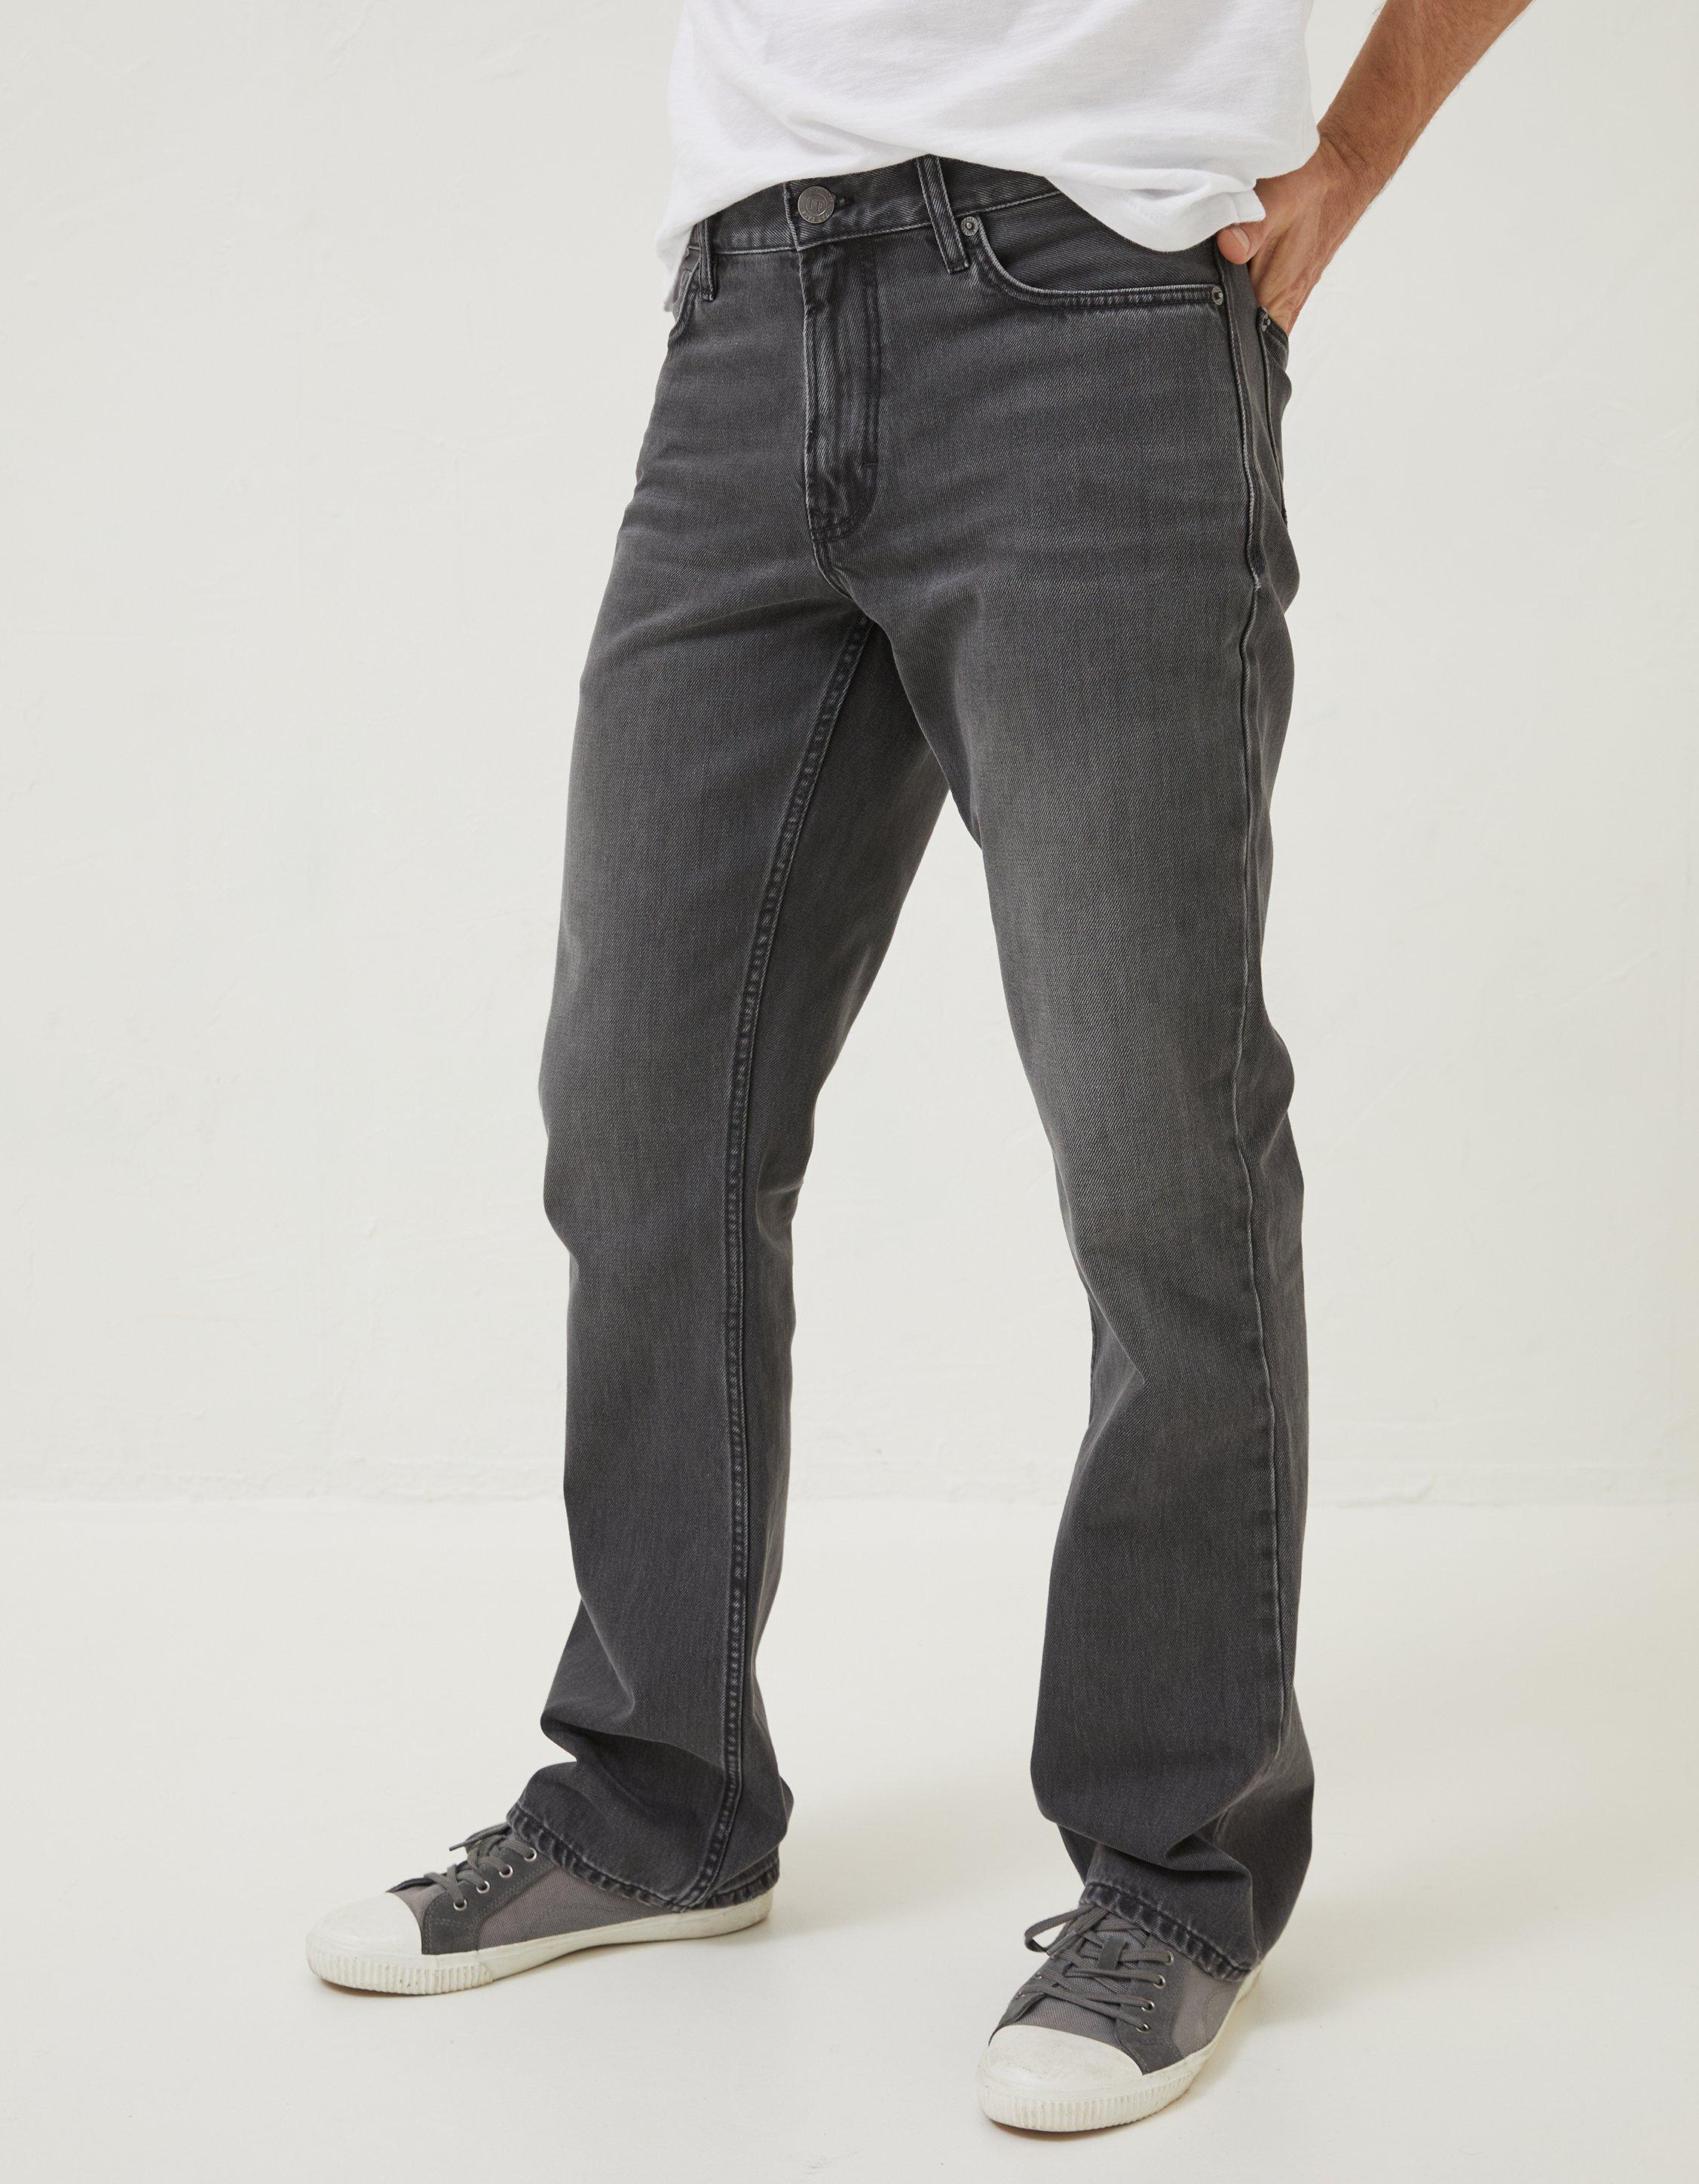 Wash Jeans, Jeans Bootcut Grey